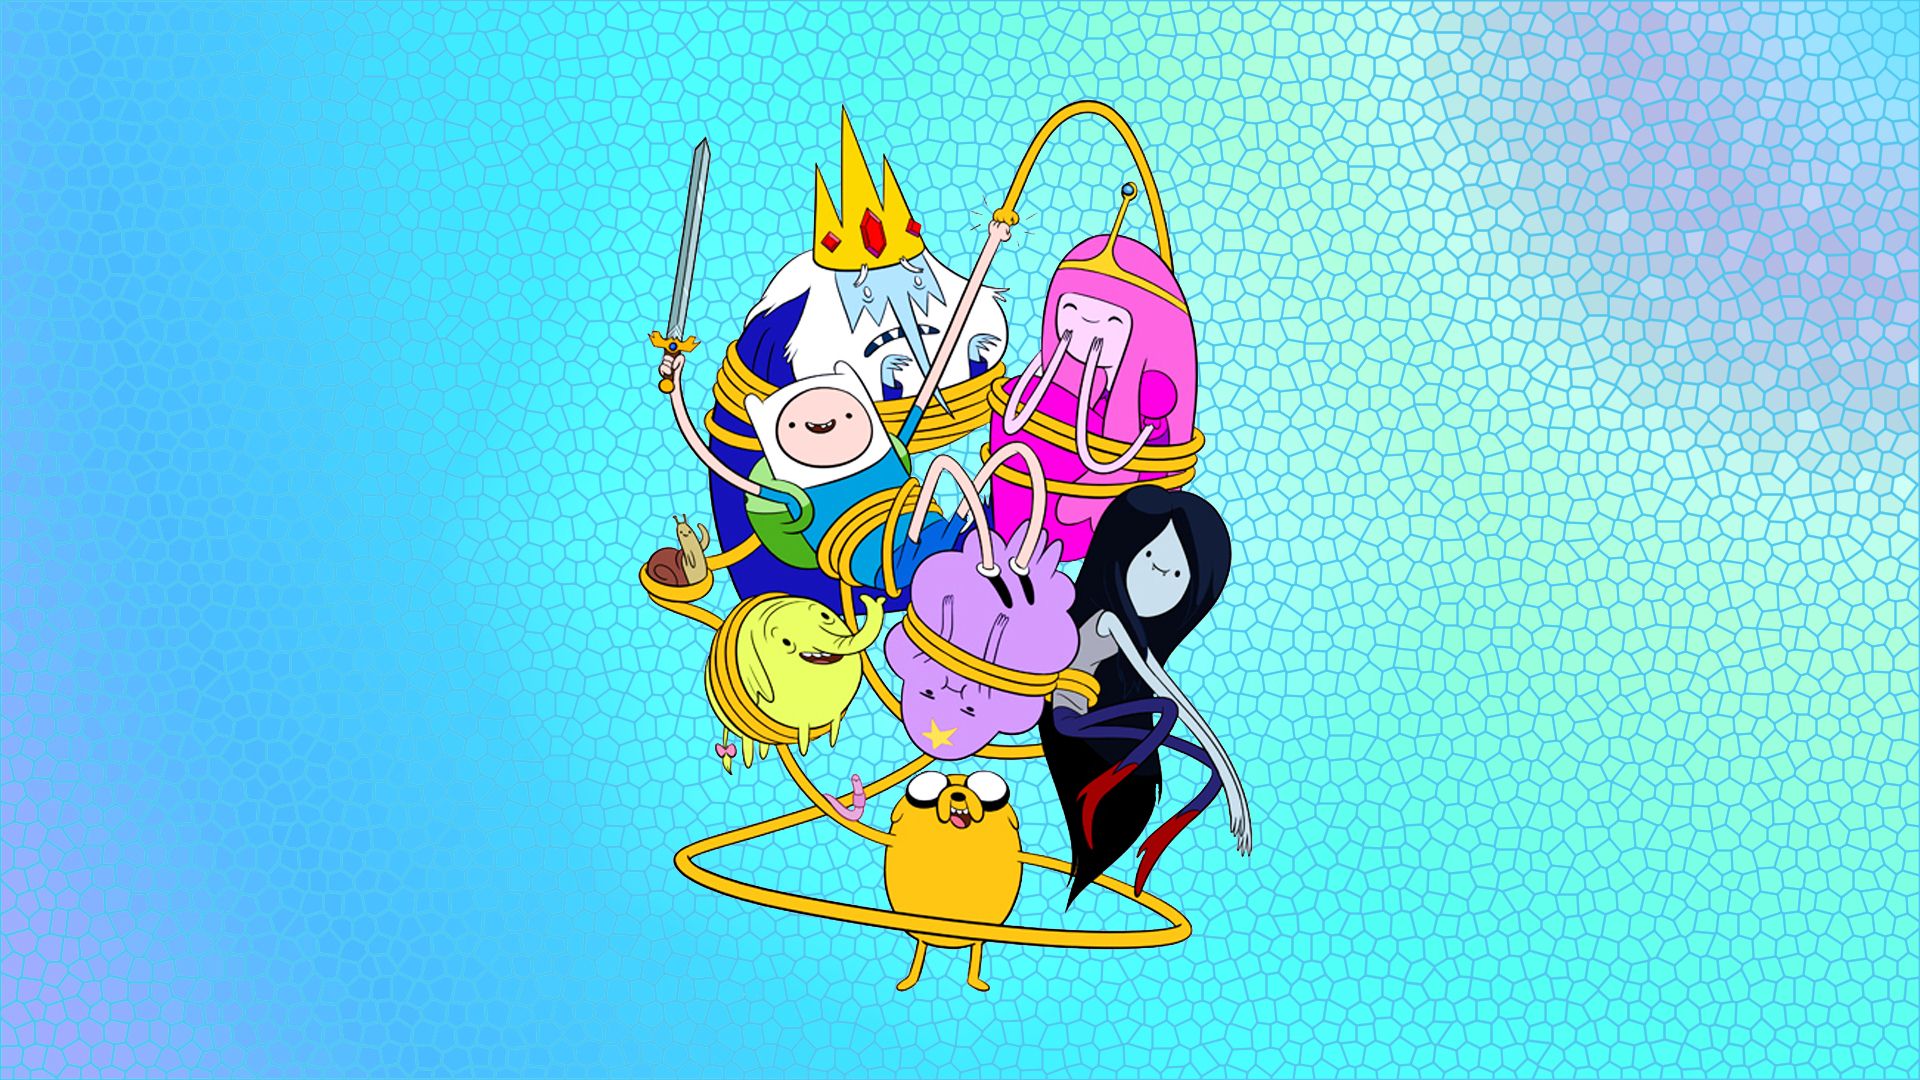 76+] Adventure Time Wallpapers Hd on